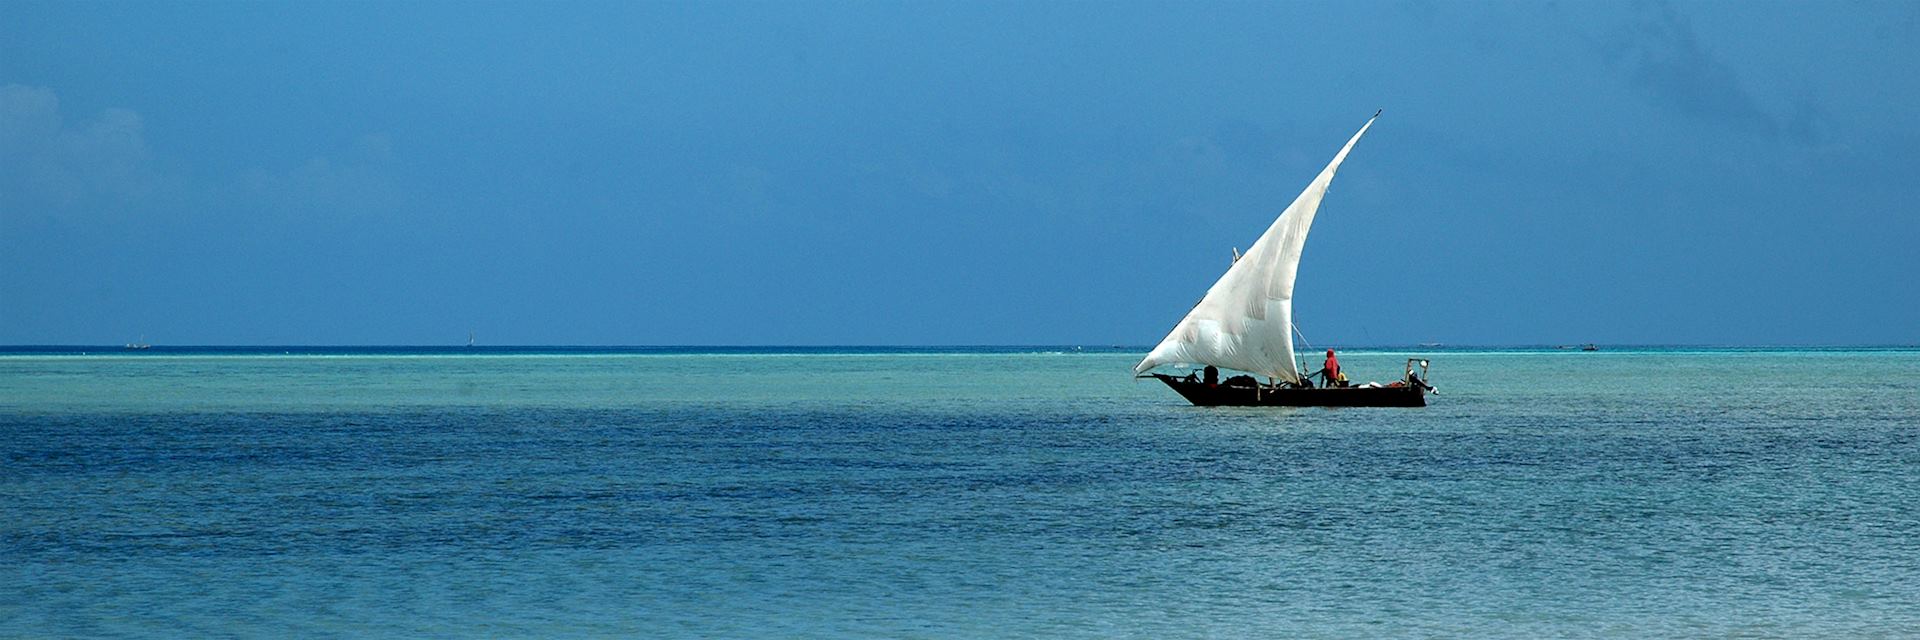 Dhow boat sailing on the Indian Ocean